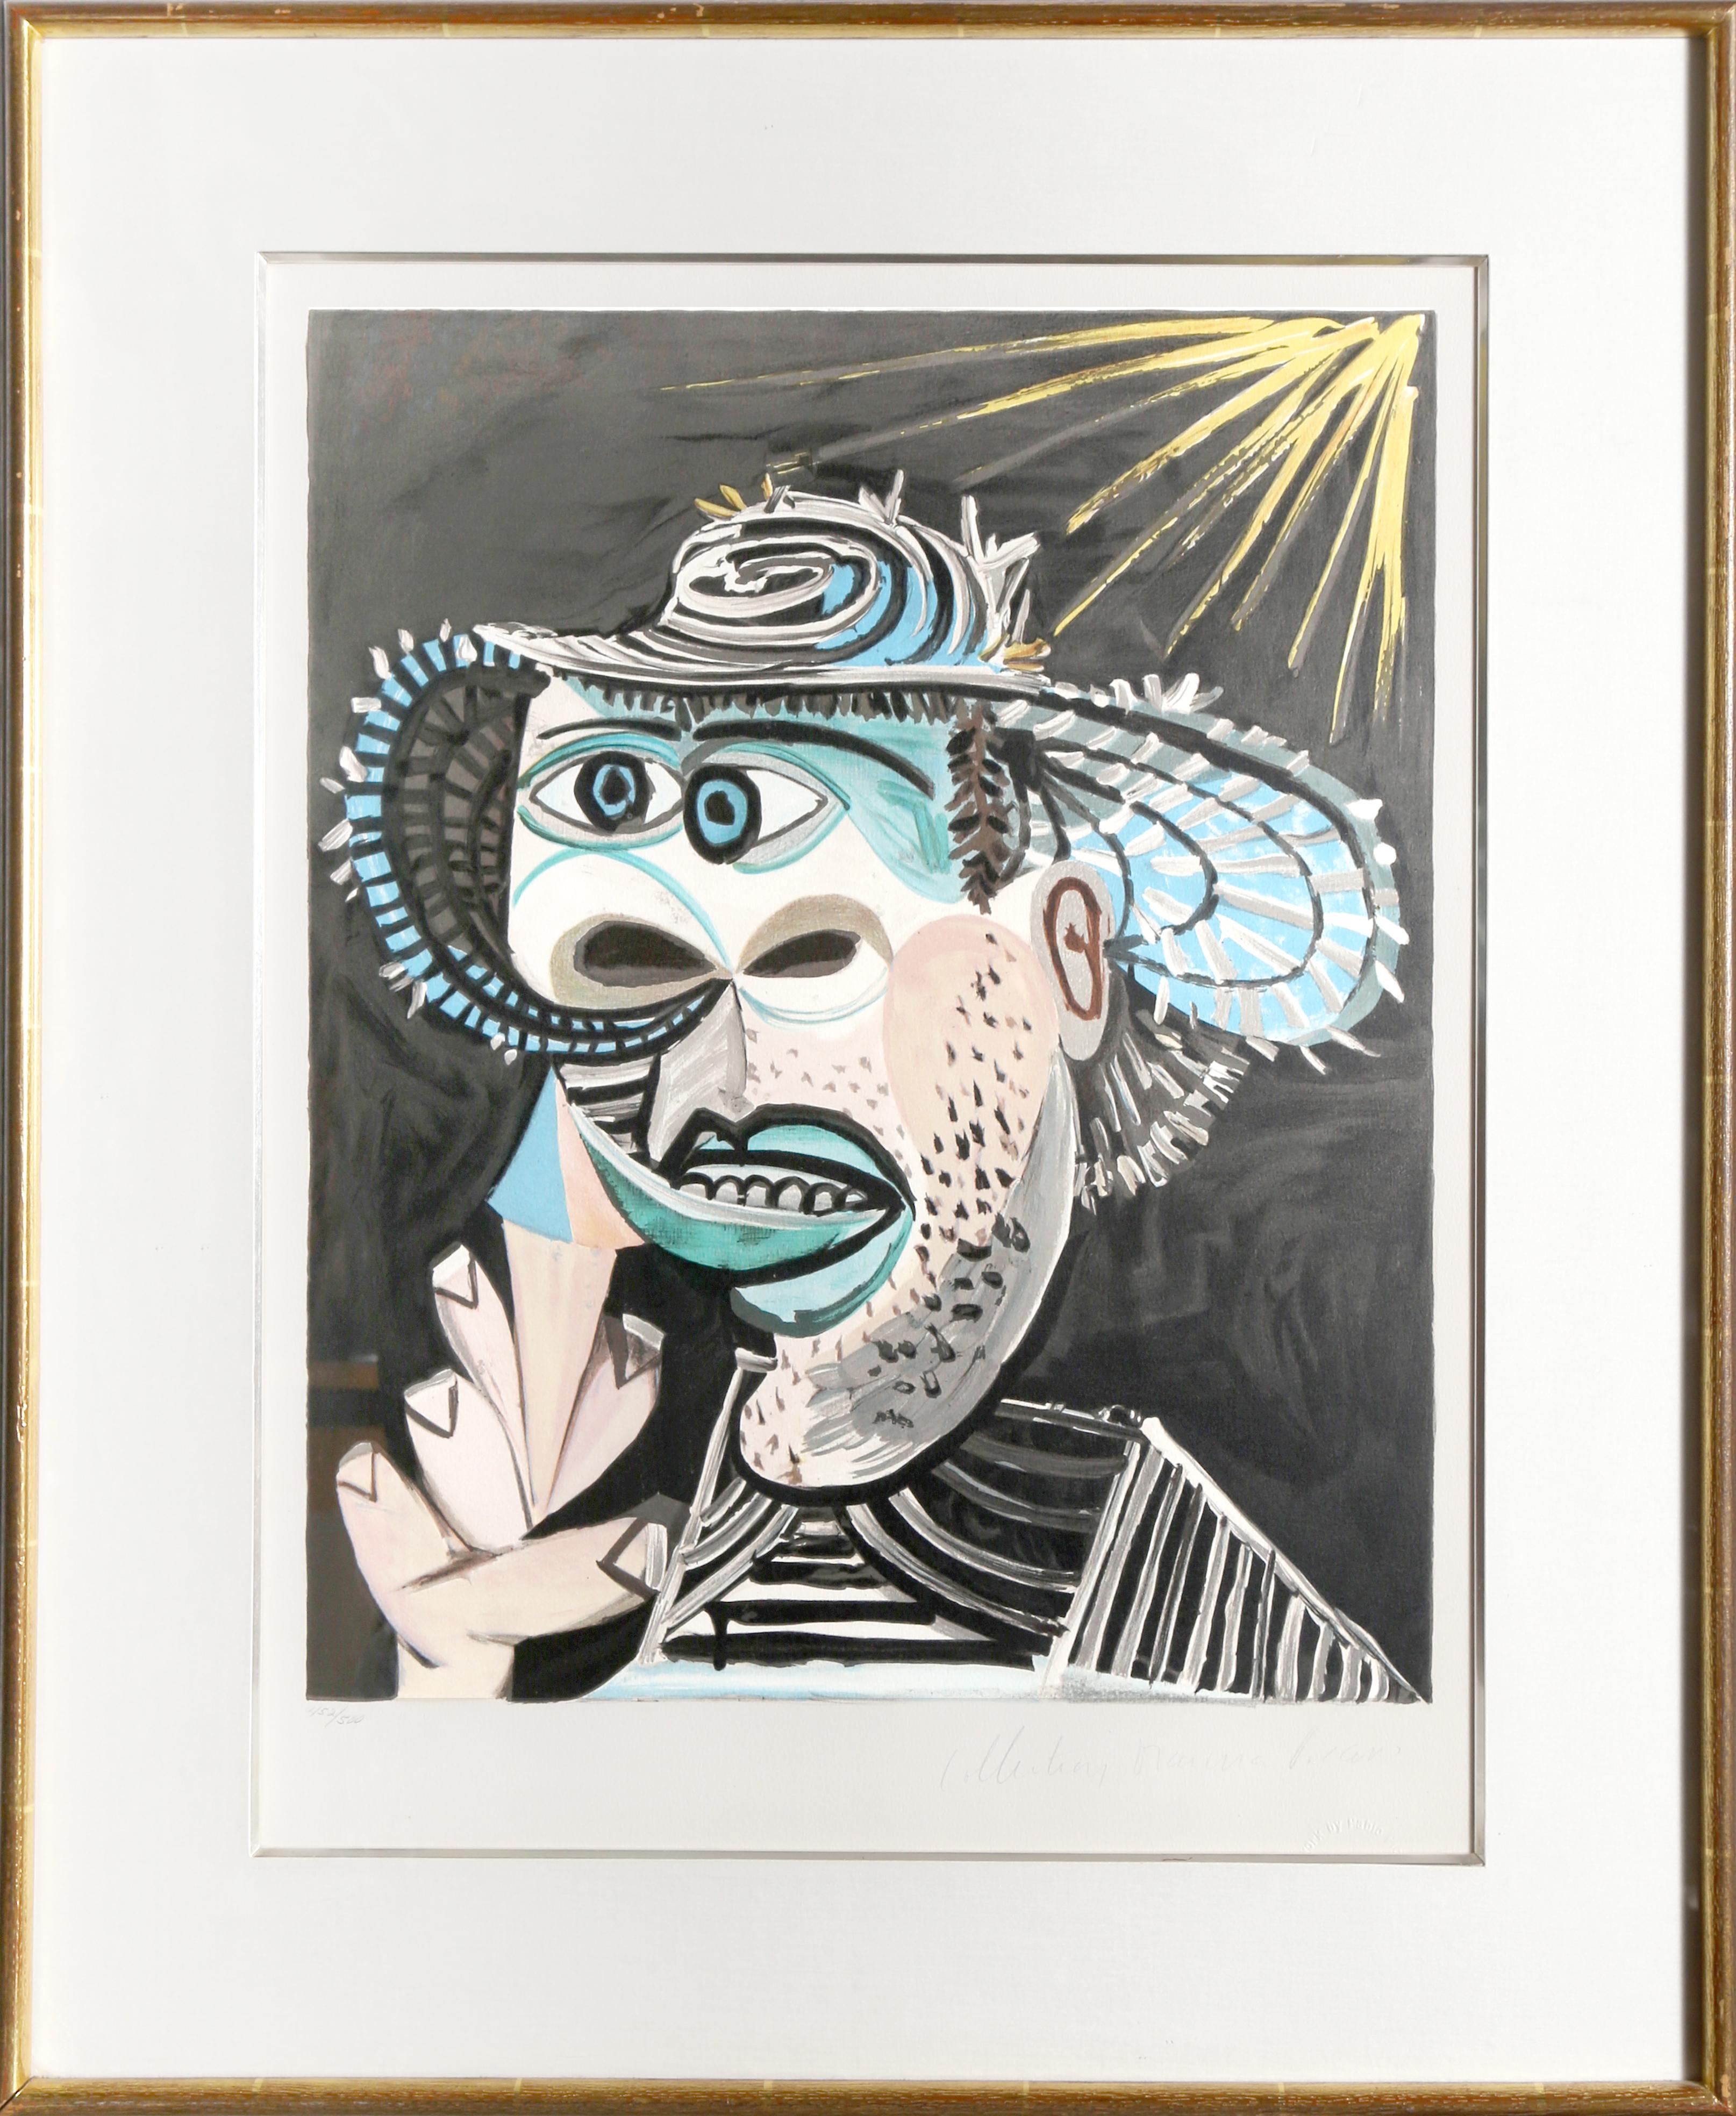 A lithograph from the Marina Picasso Estate Collection after the Pablo Picasso painting "Homme Au Cornet".  The original painting was completed in 1938. In the 1970's after Picasso's death, Marina Picasso, his granddaughter, authorized the creation